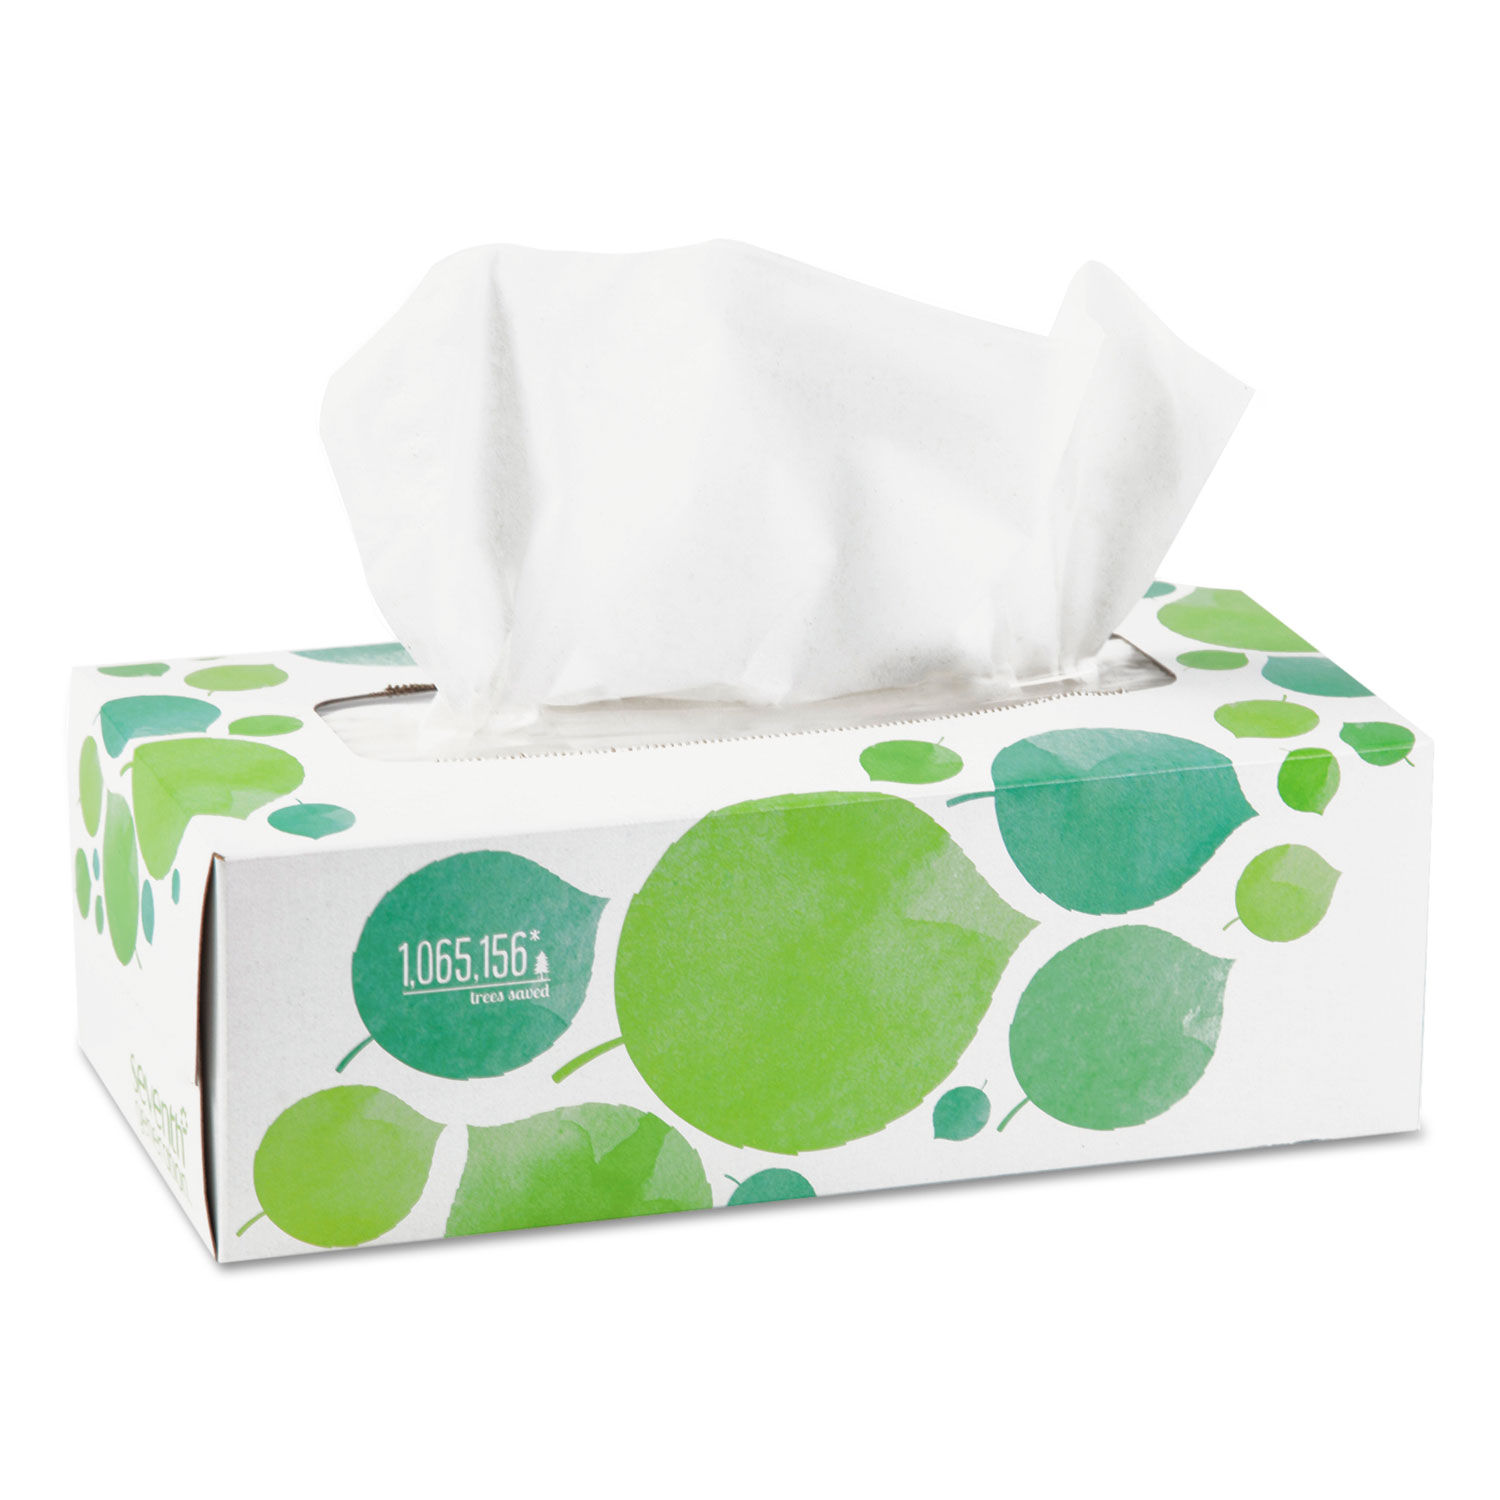  Seventh Generation 13712 100% Recycled Facial Tissue, 2-Ply, White, 175 Sheets/Box (SEV13712BX) 